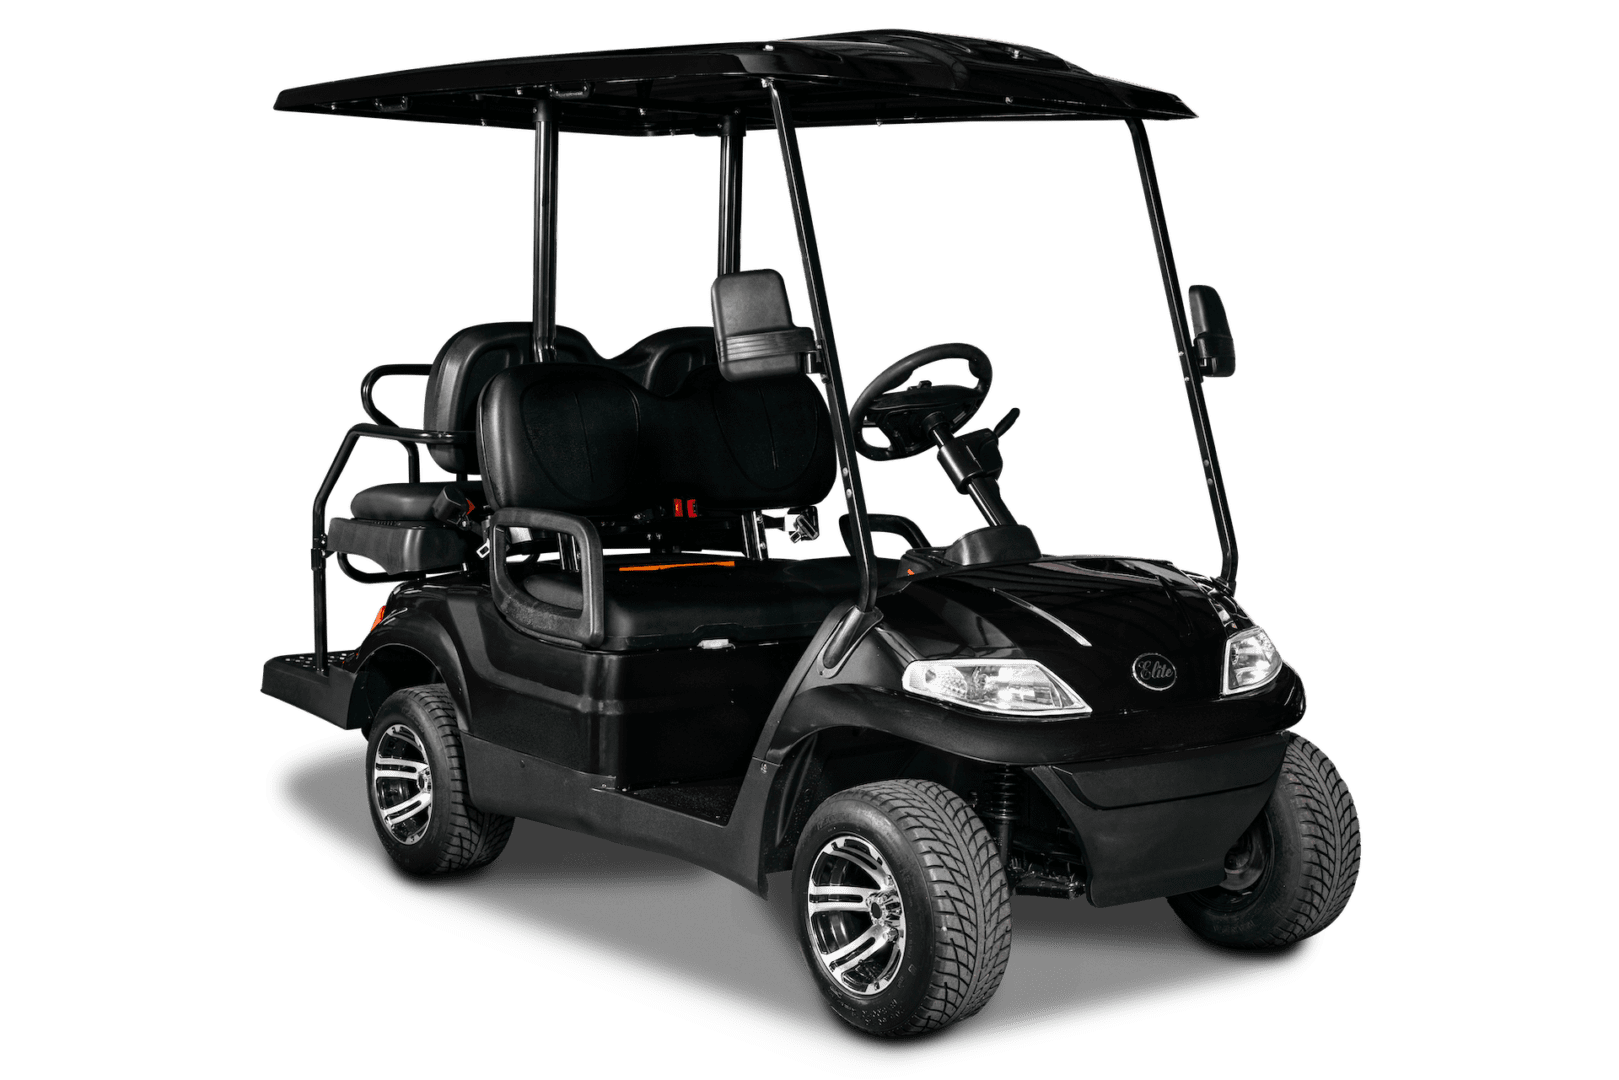 A black golf cart with four seats and a canopy.